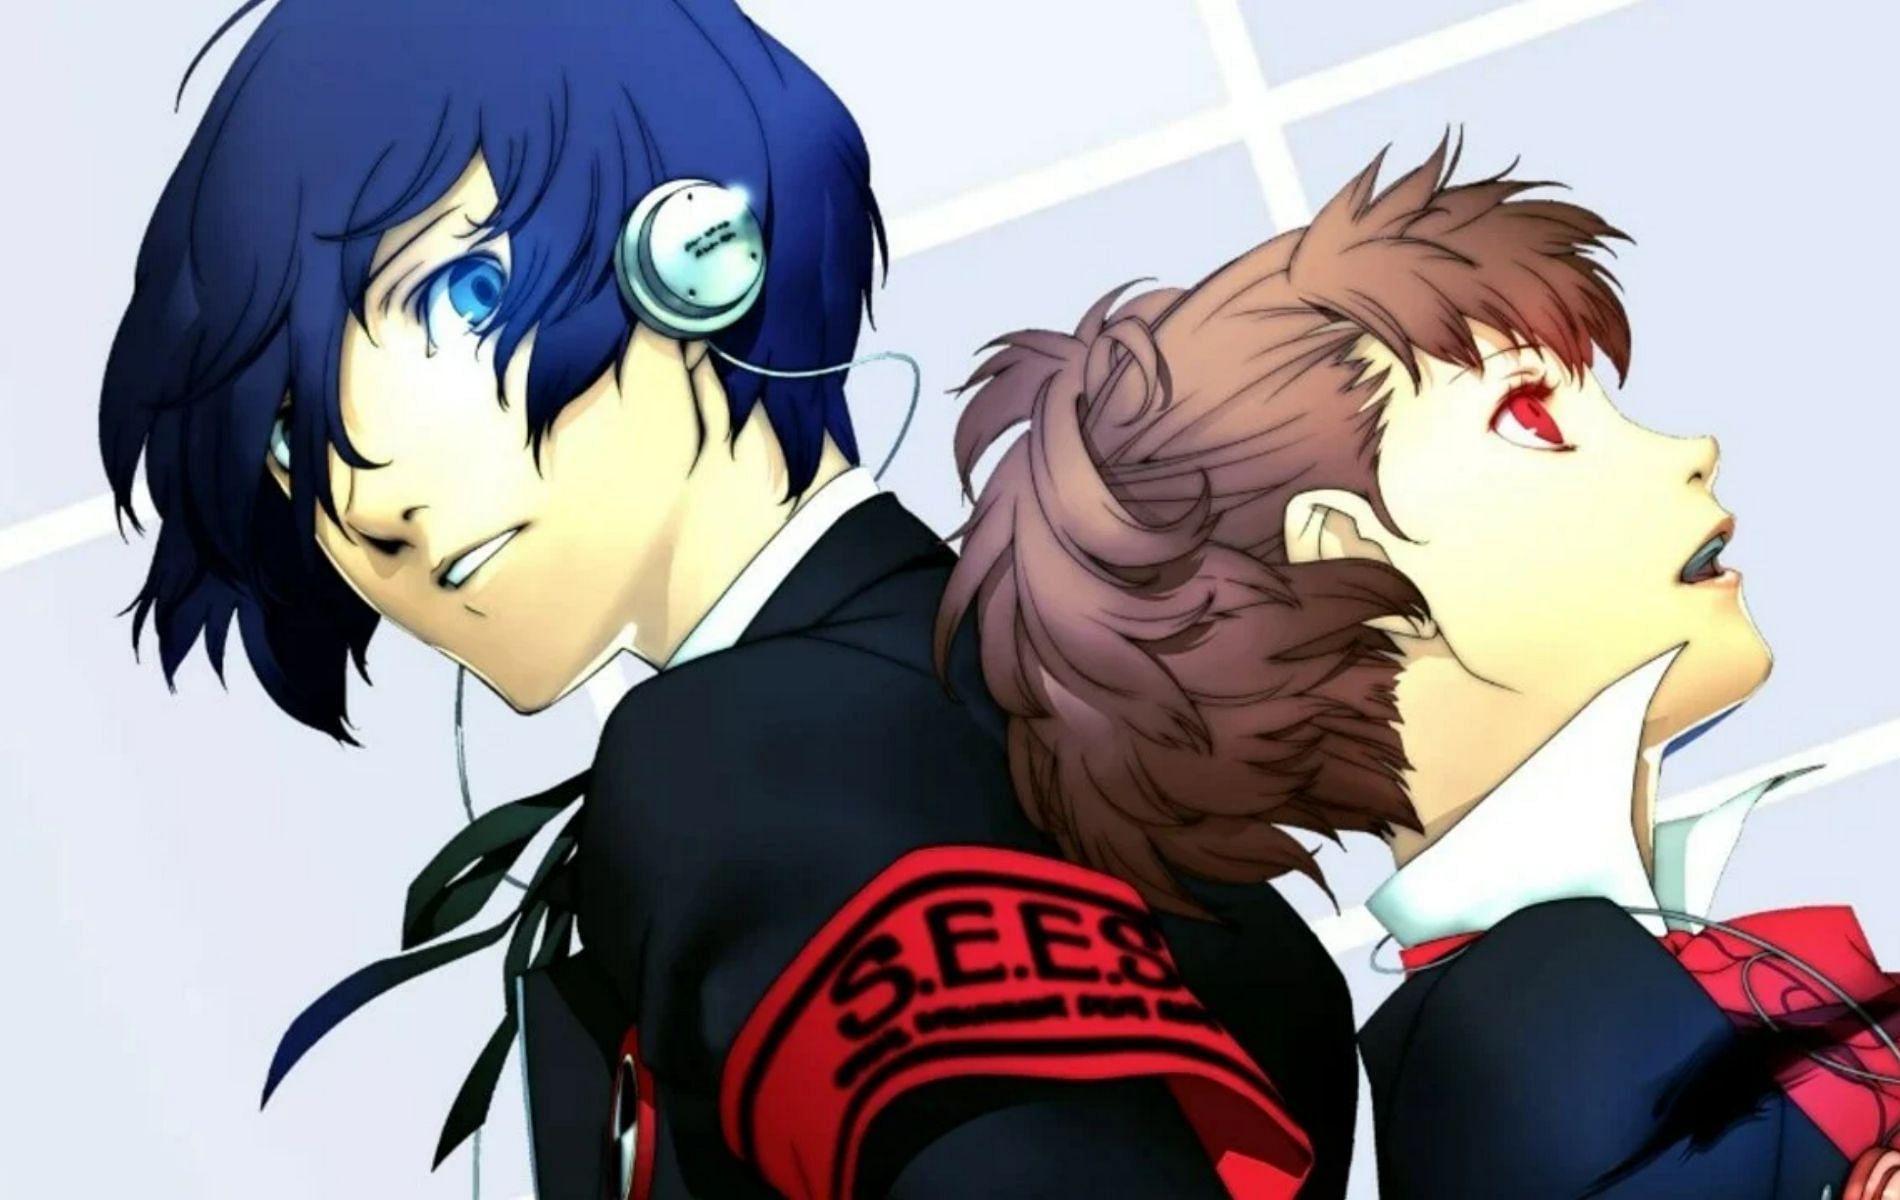 Is Persona 3 getting a full remake? (Image via Persona 3)